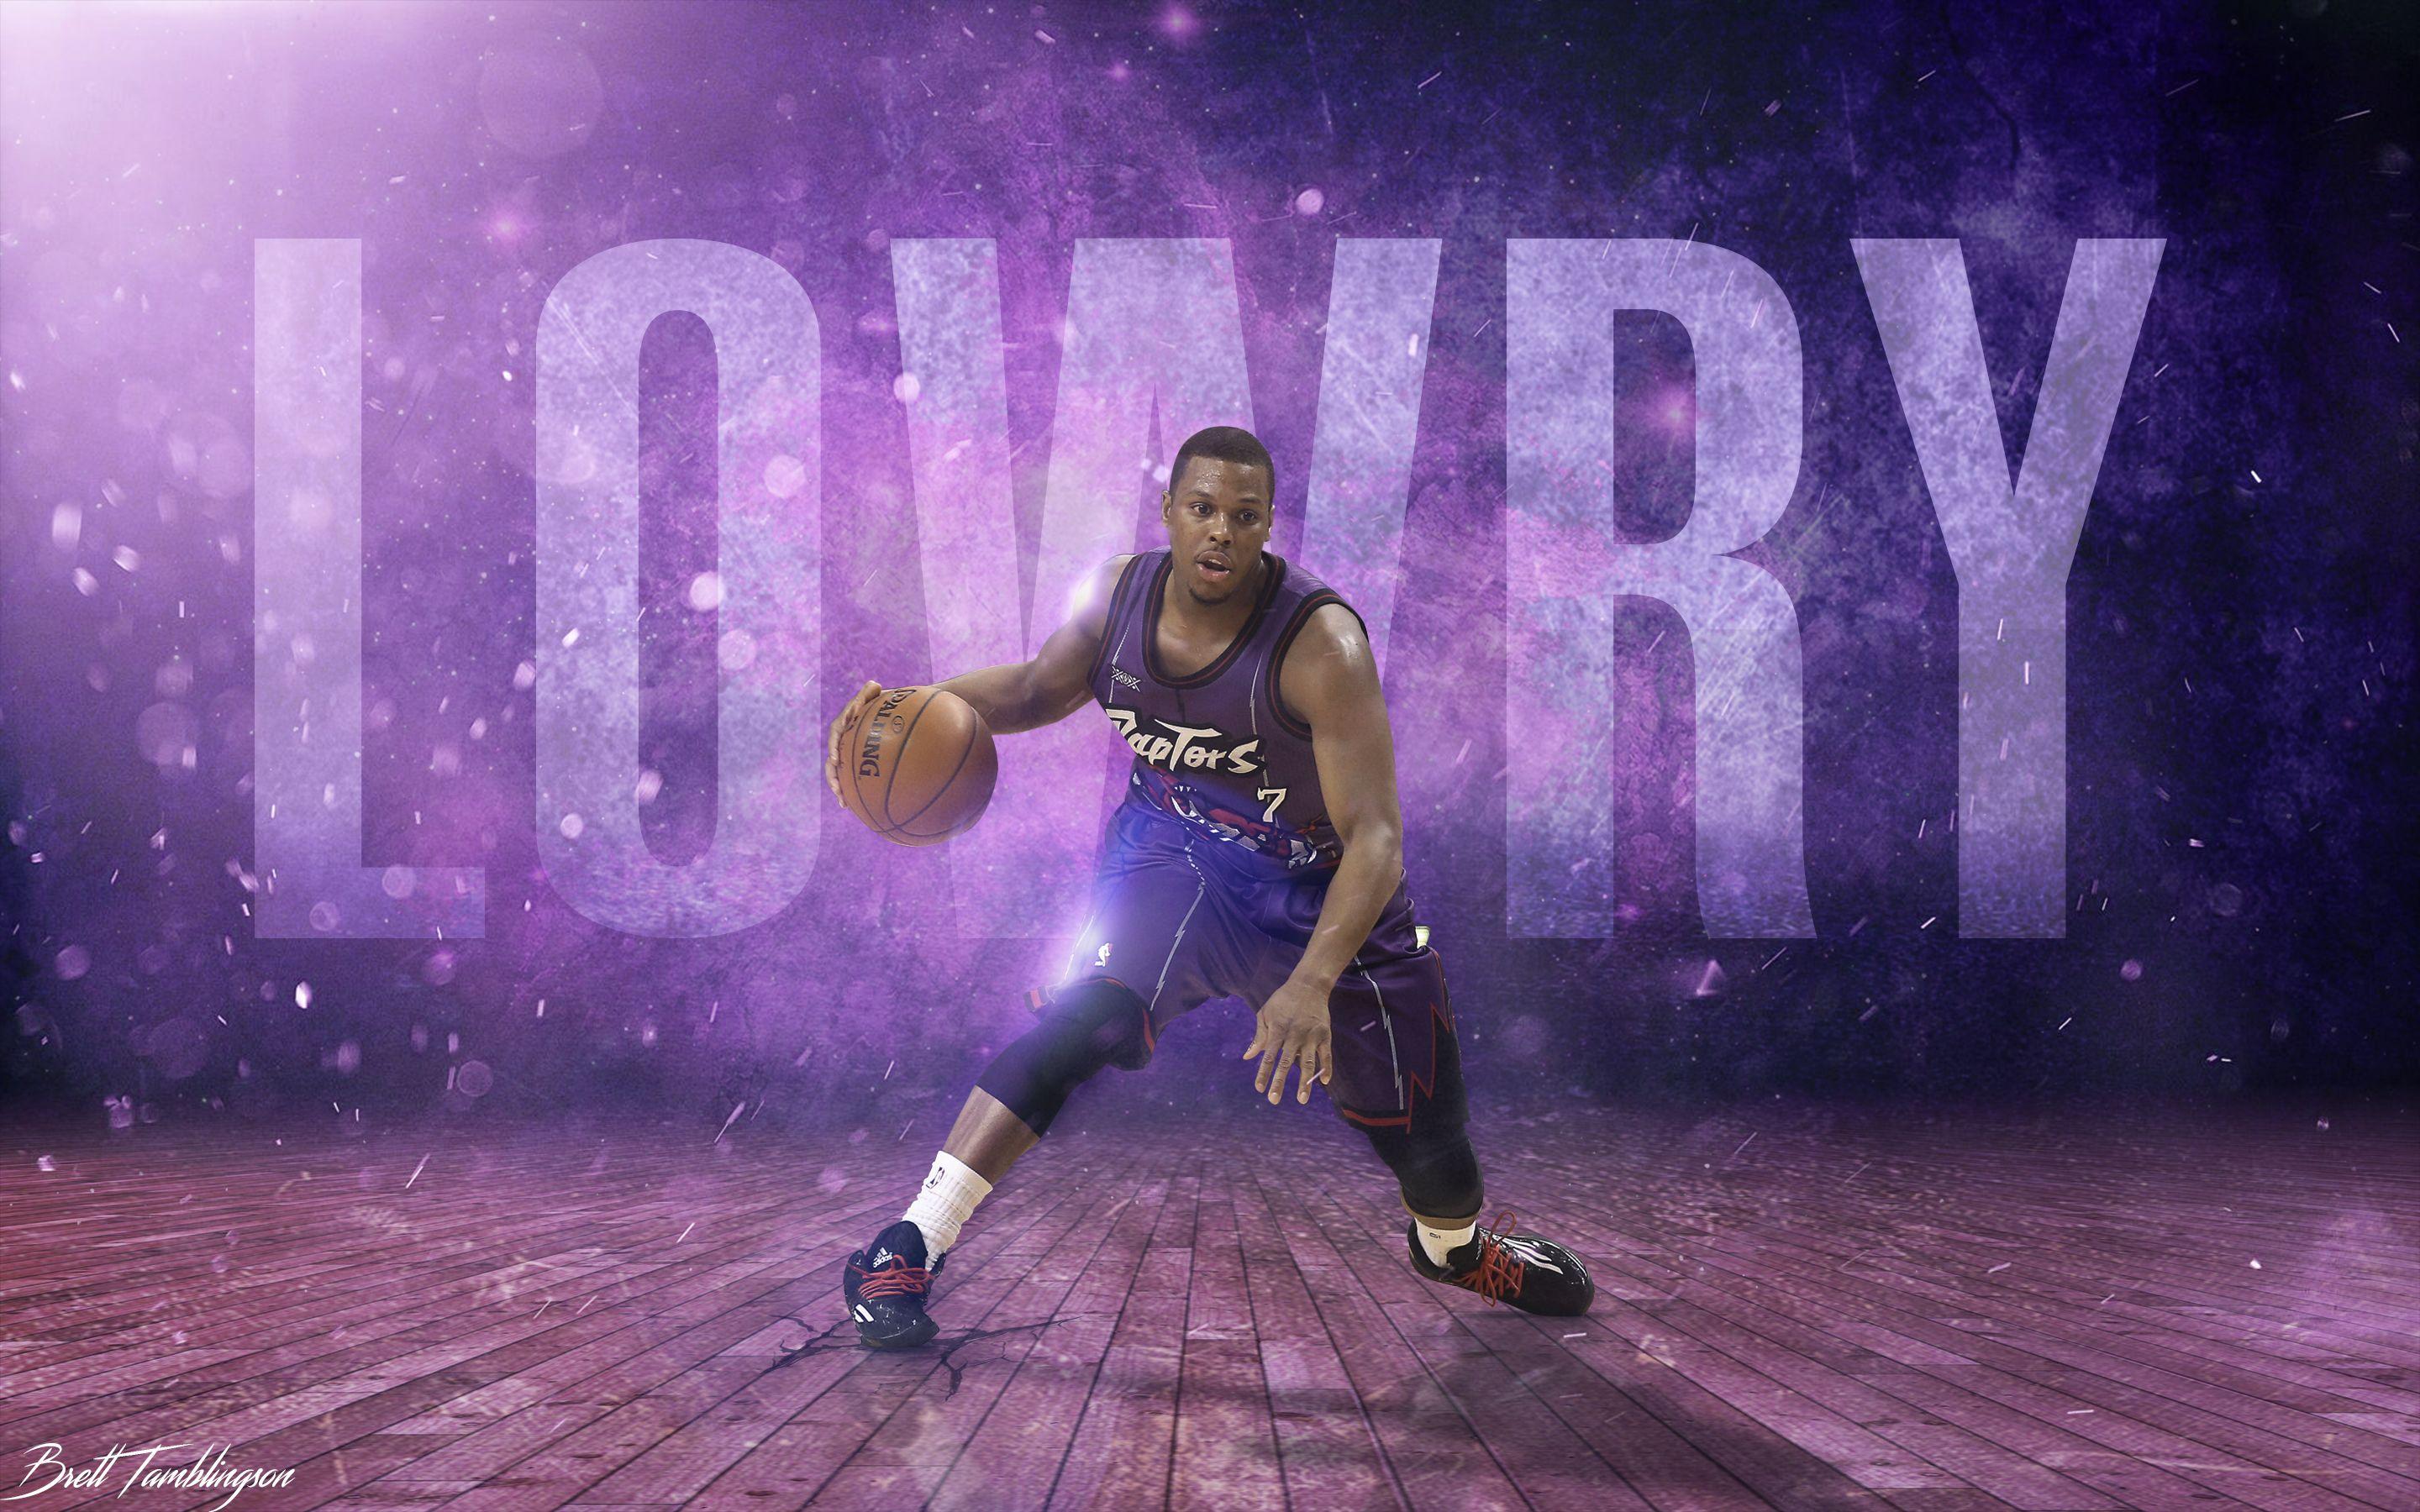 Kyle Lowry Wallpaper High Resolution and Quality Download